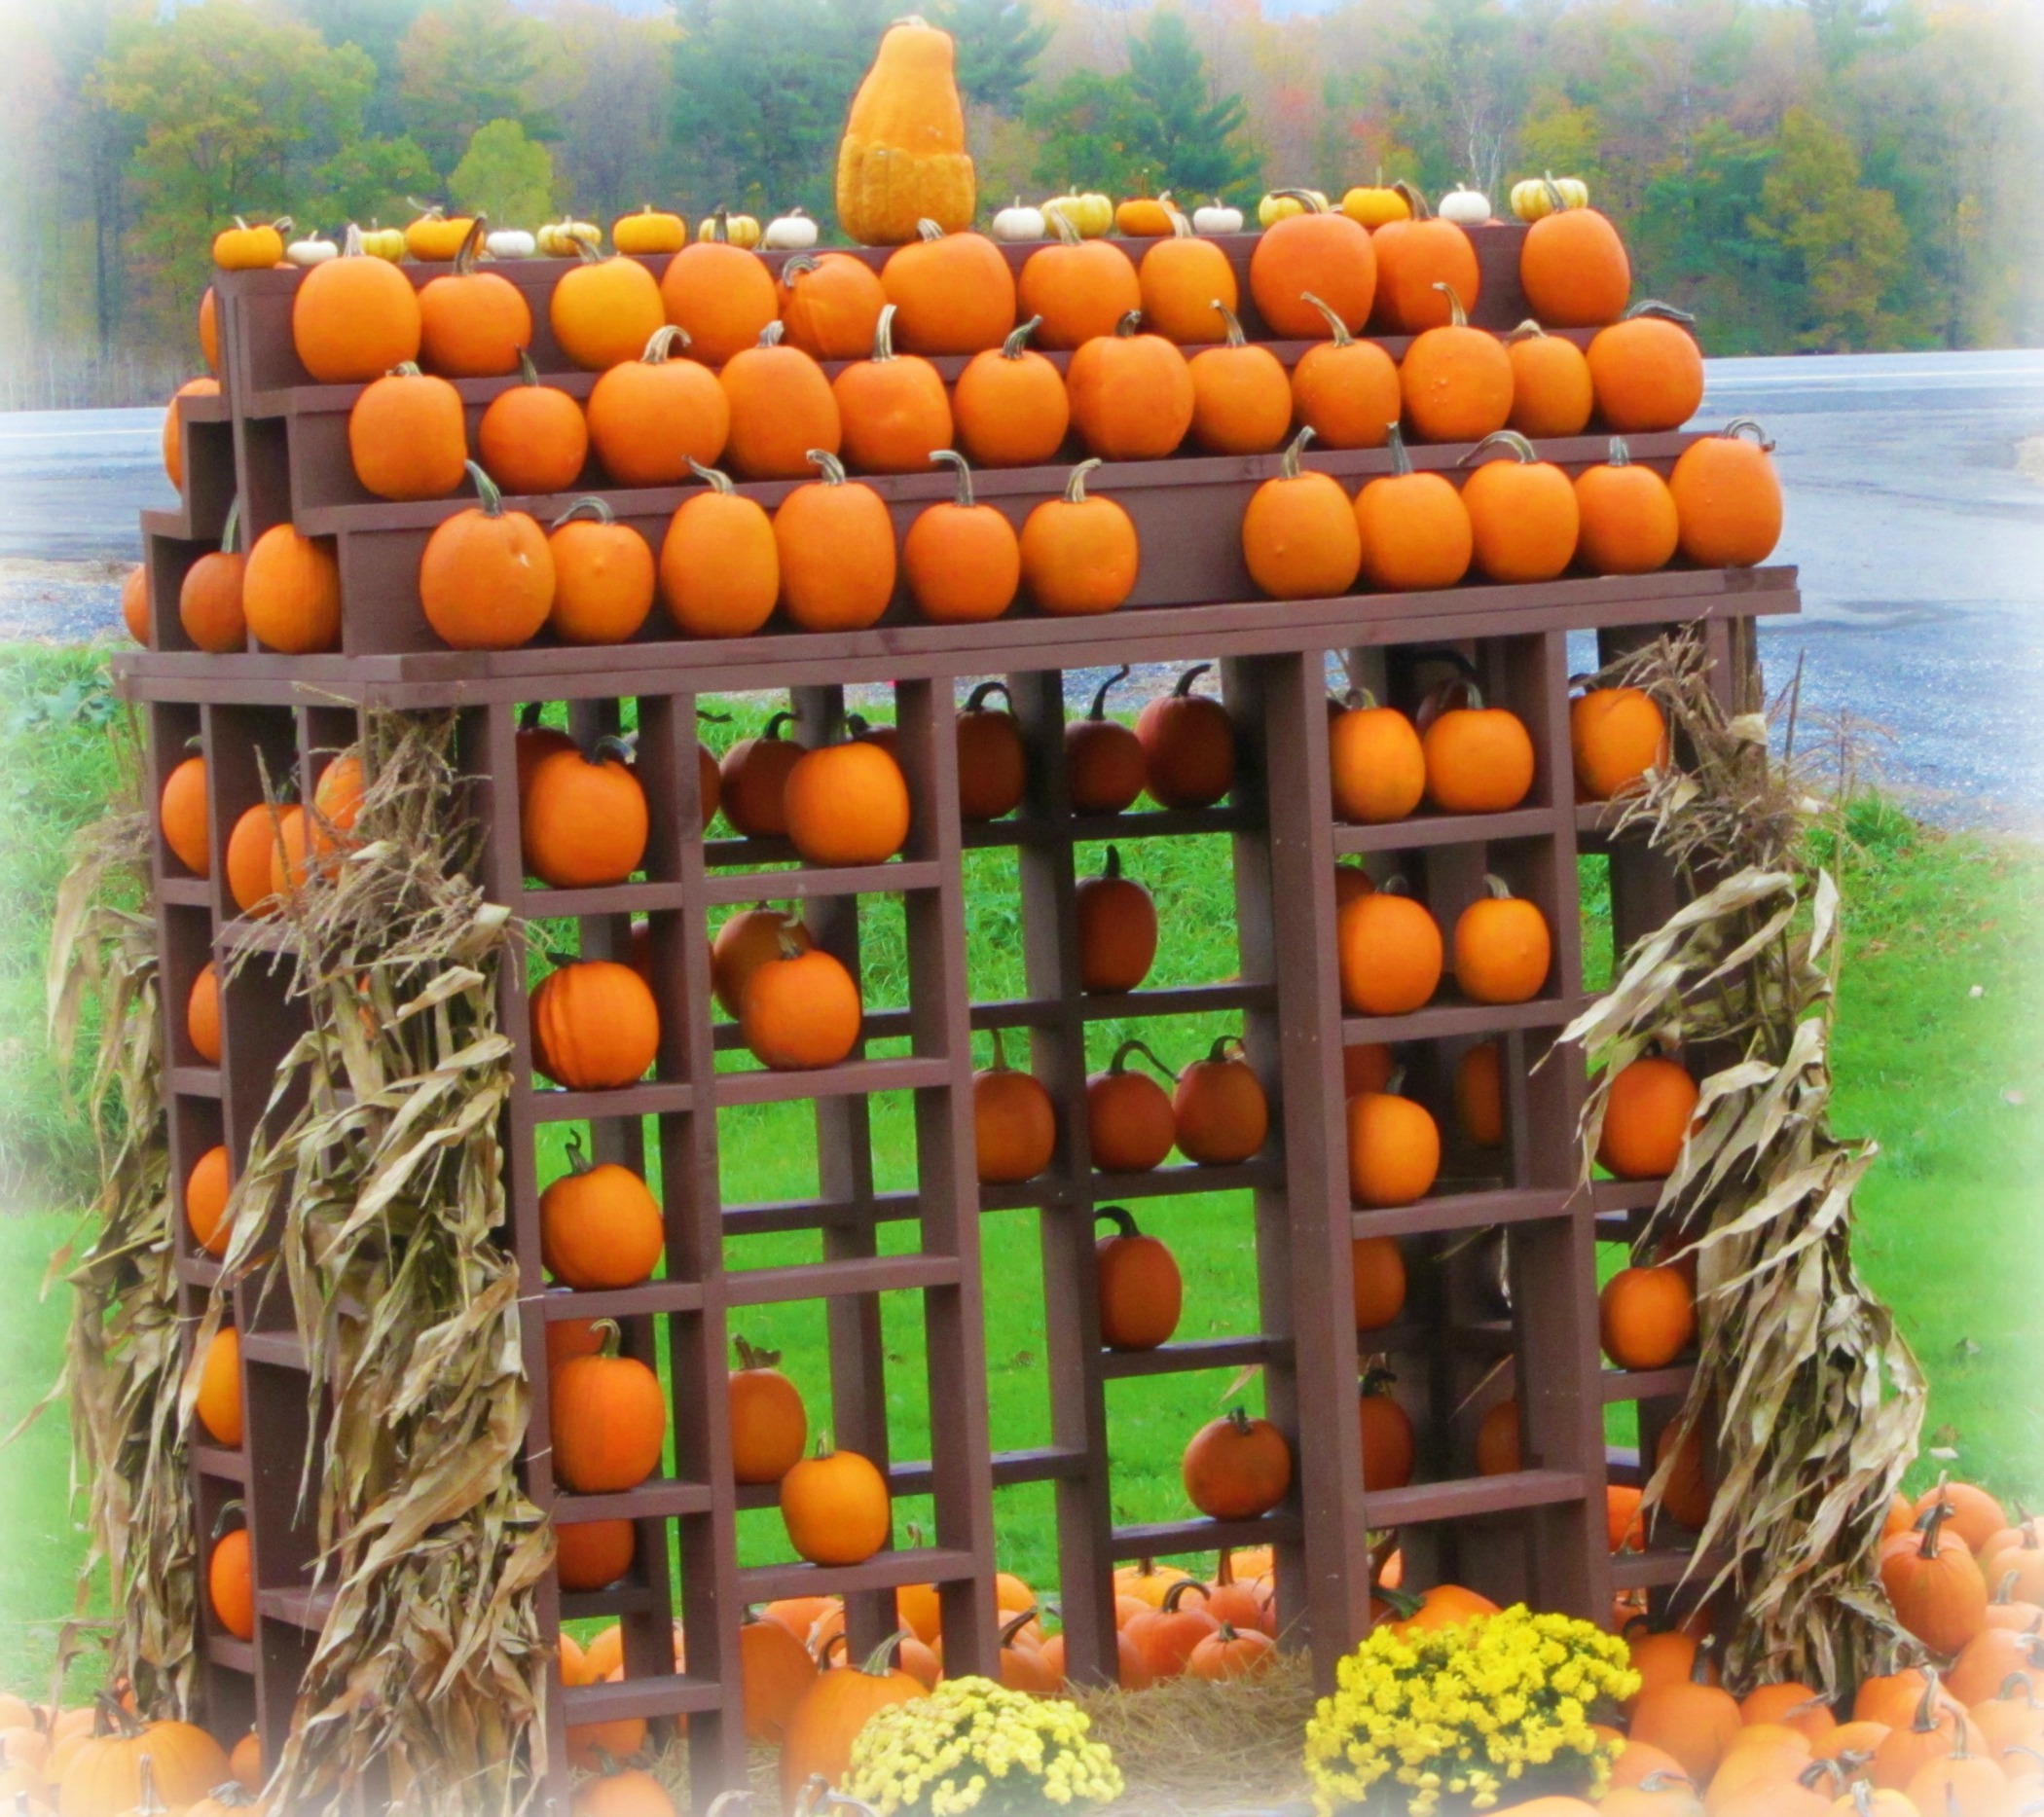 Pumpkin Patch (user submitted)